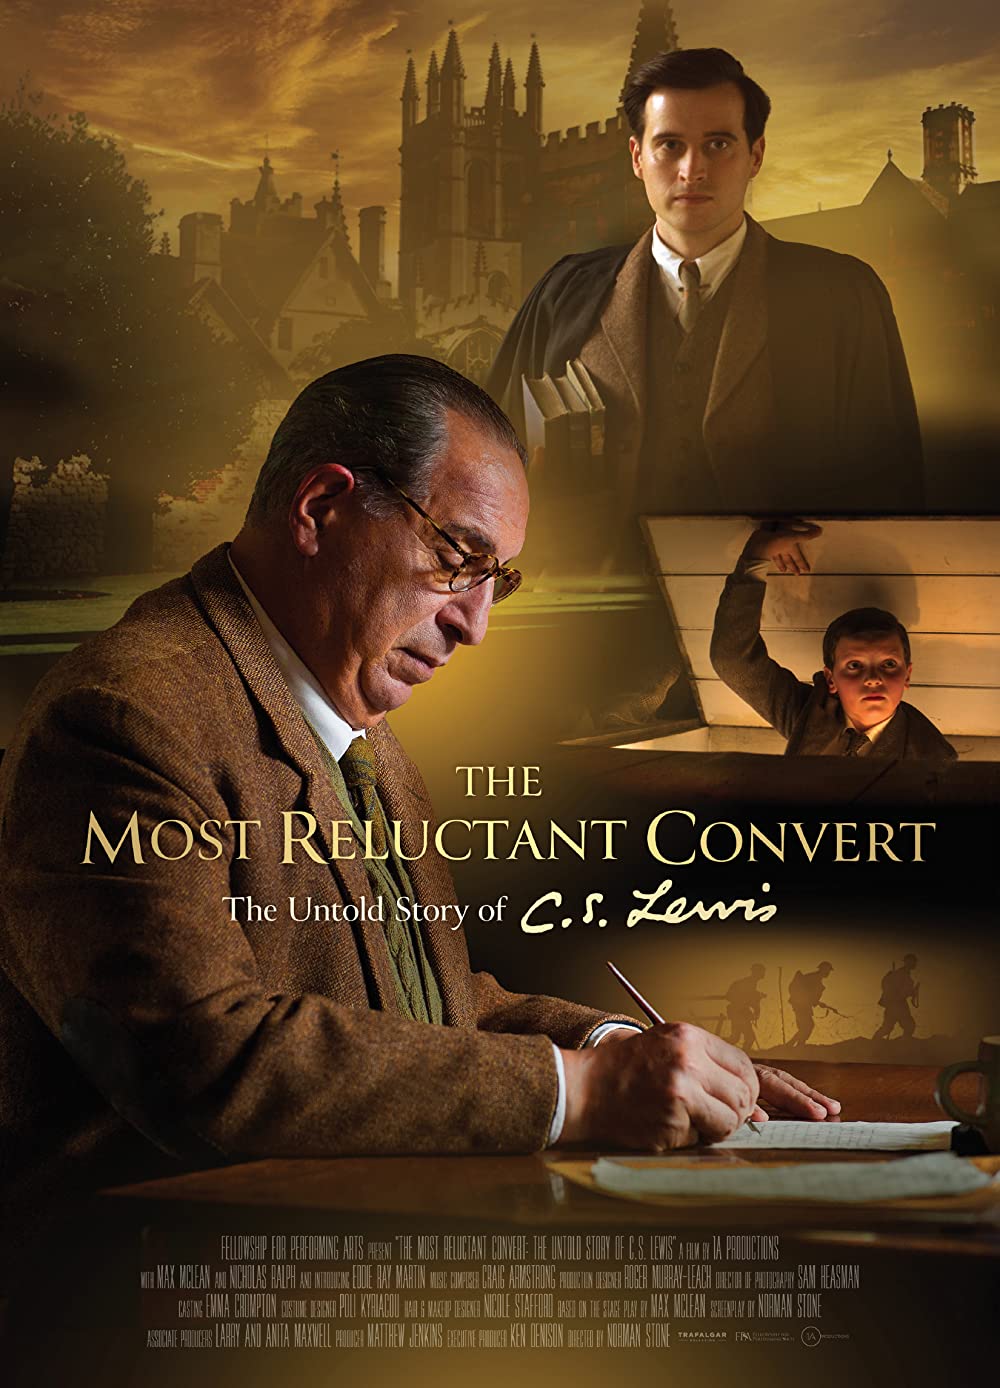 Banner Phim Câu Chuyện Chưa Kể Của C.S. Lewis (The Most Reluctant Convert: The Untold Story of C.S. Lewis)